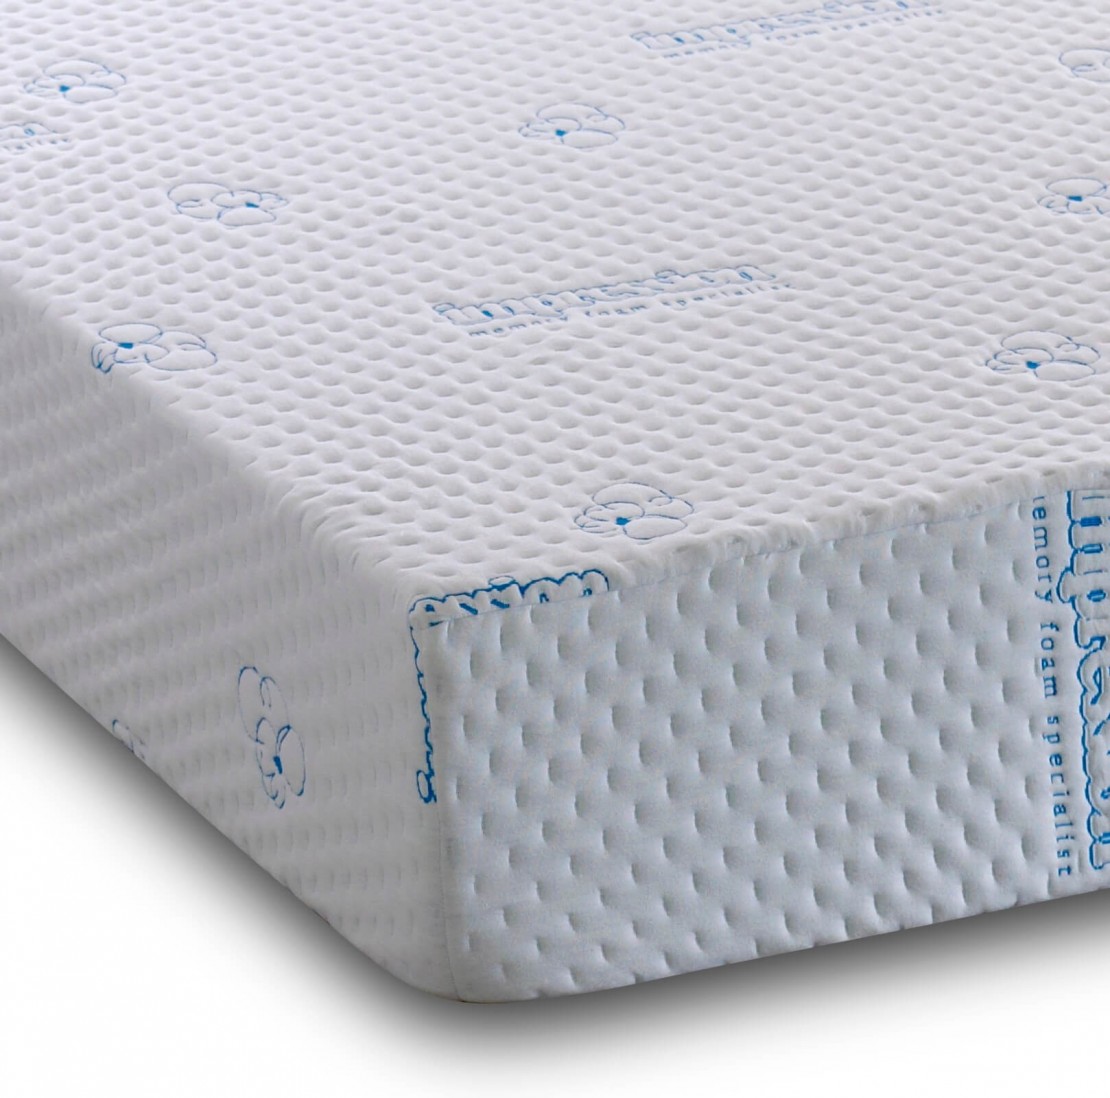 /_images/product-photos/visco-therapy-visco-1000-hd-memory-foam-firm-mattress-a.jpg